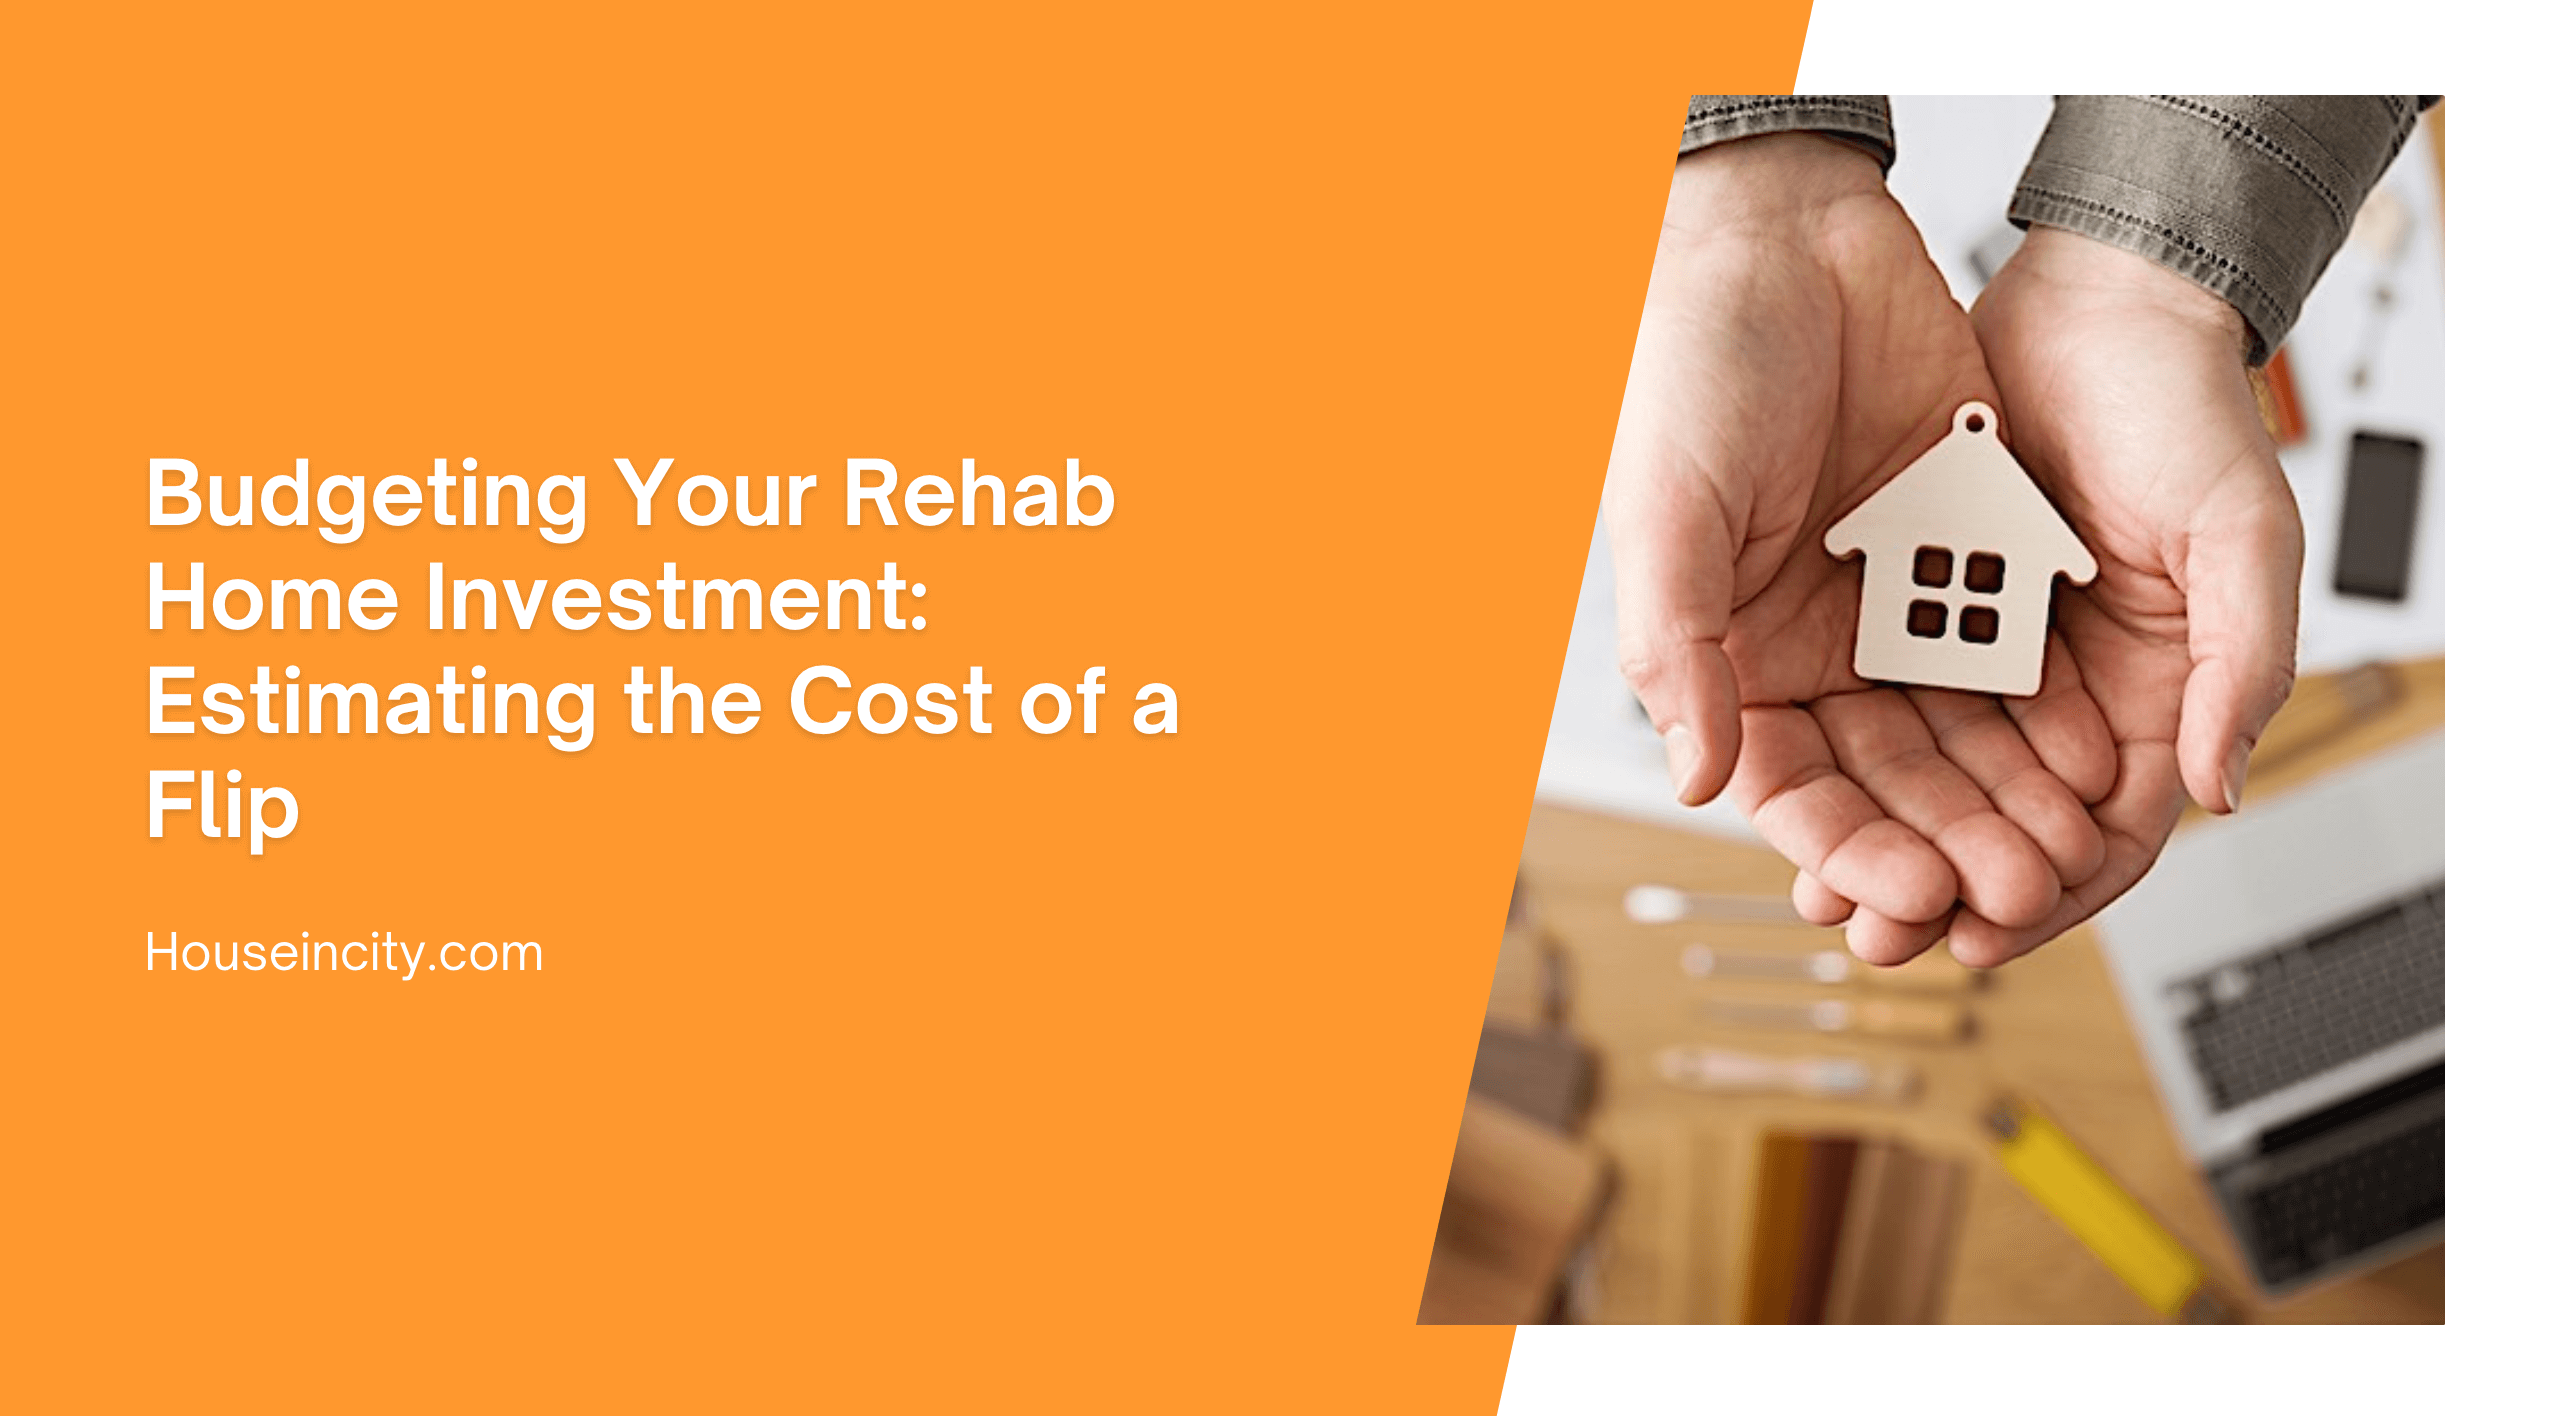 Budgeting Your Rehab Home Investment: Estimating the Cost of a Flip